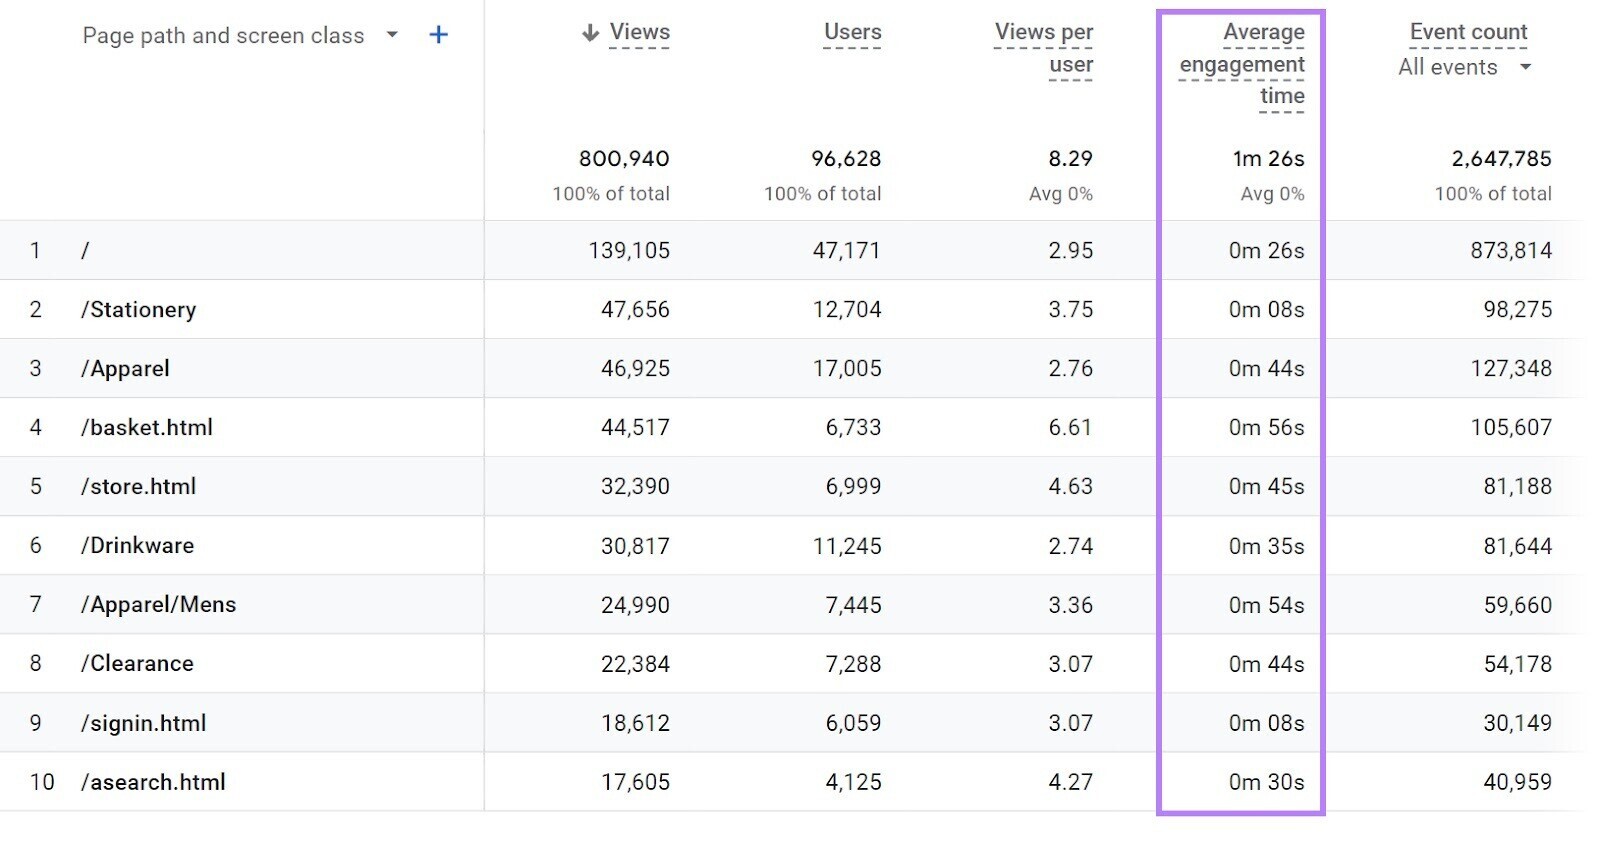 "Average engagement time" column highlighted in Google Analytics